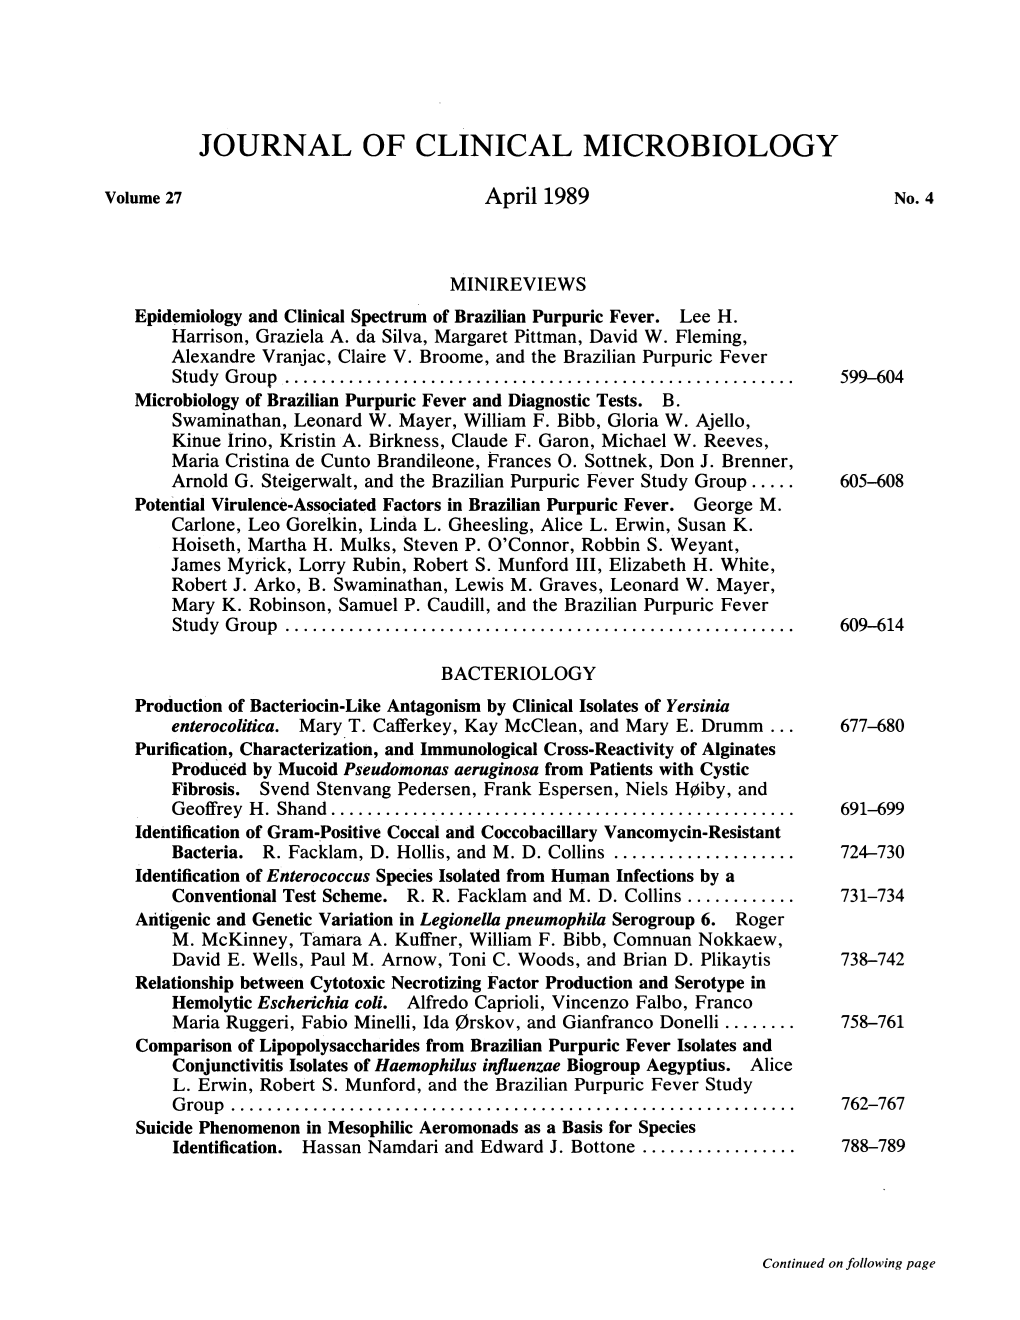 JOURNAL of CLINICAL MICROBIOLOGY Volume 27 April 1989 No